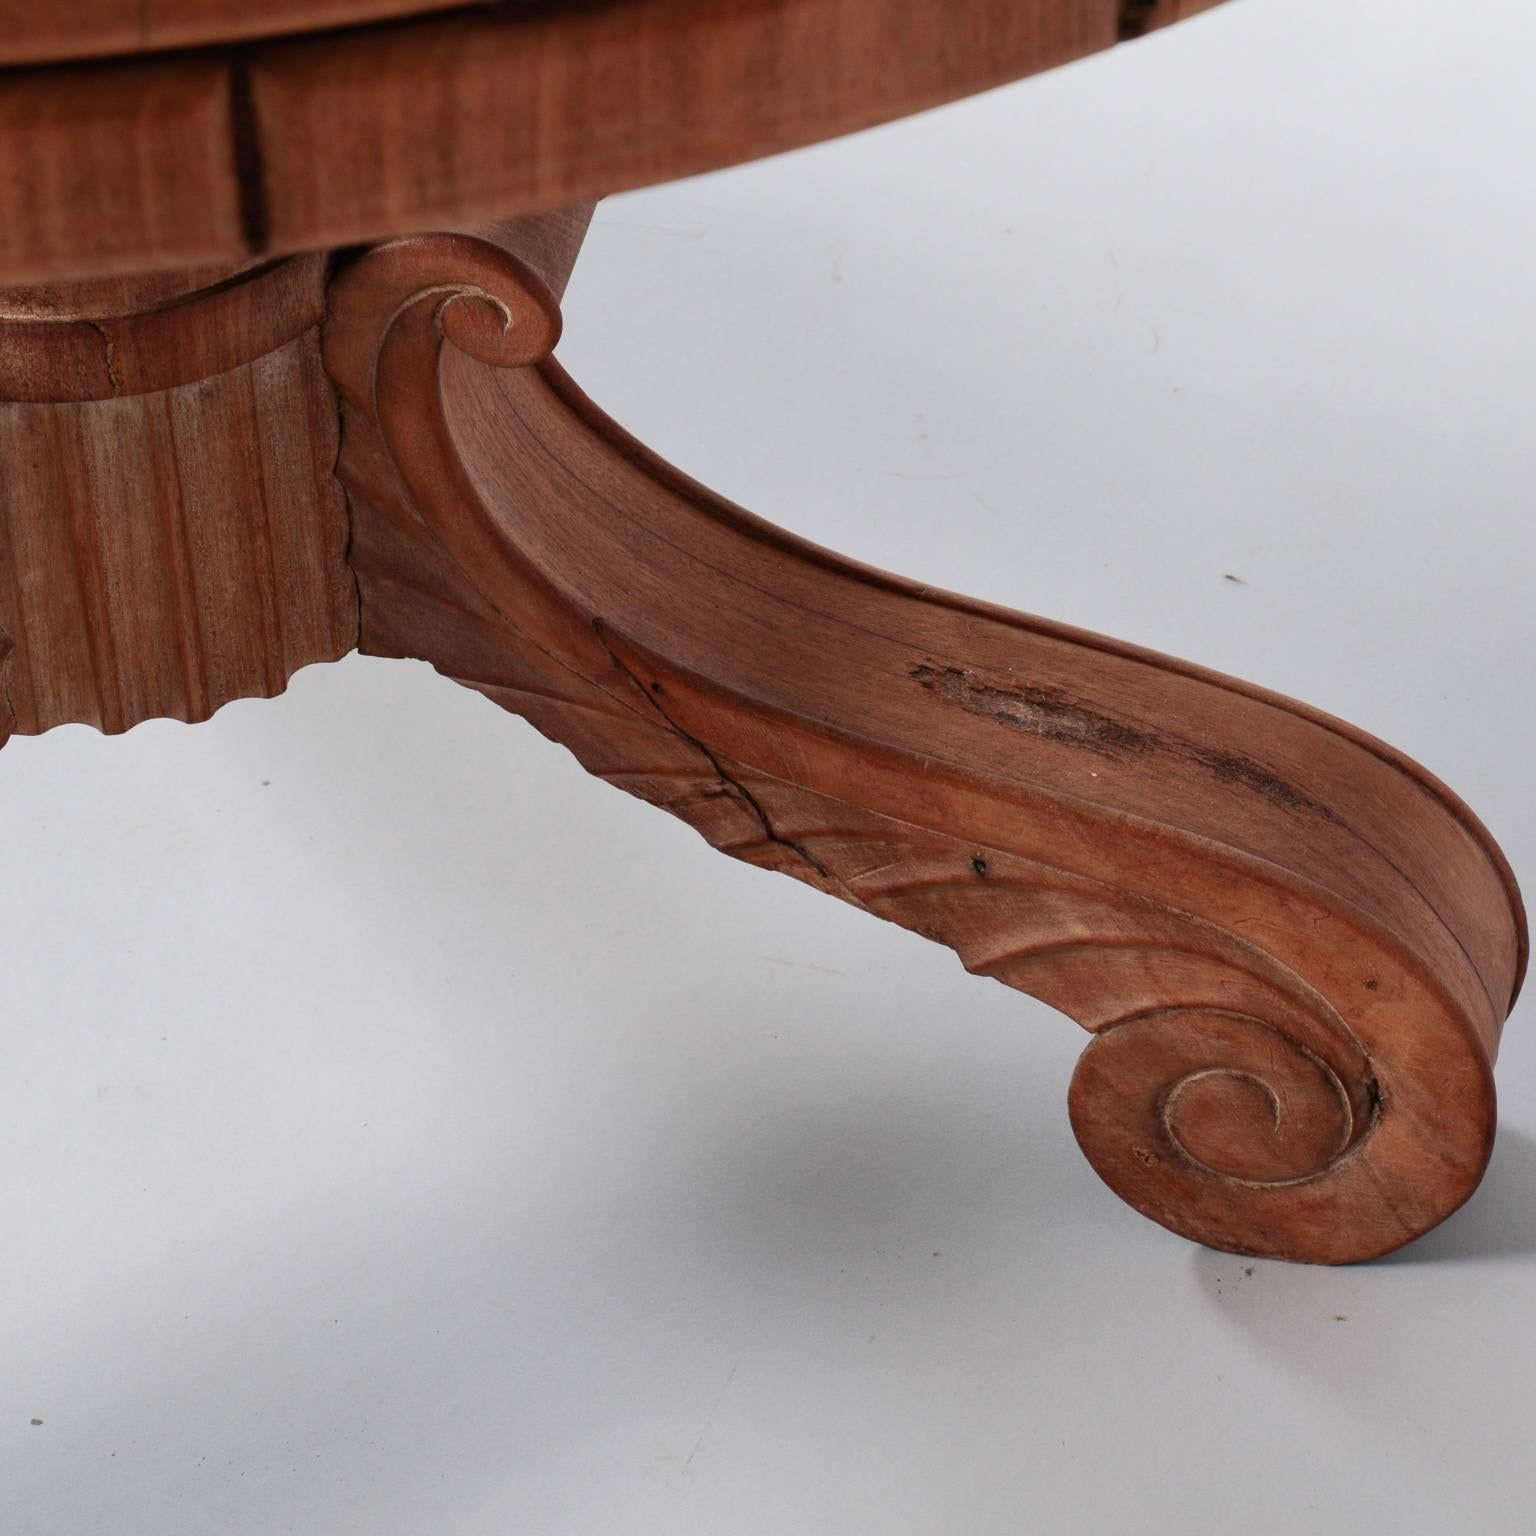 French center table, circa 1920s has a three leg base with carved acanthus leaf detail, a turned center support shaft, carved ridges along the table edge and a round pale gray marble top.
                           